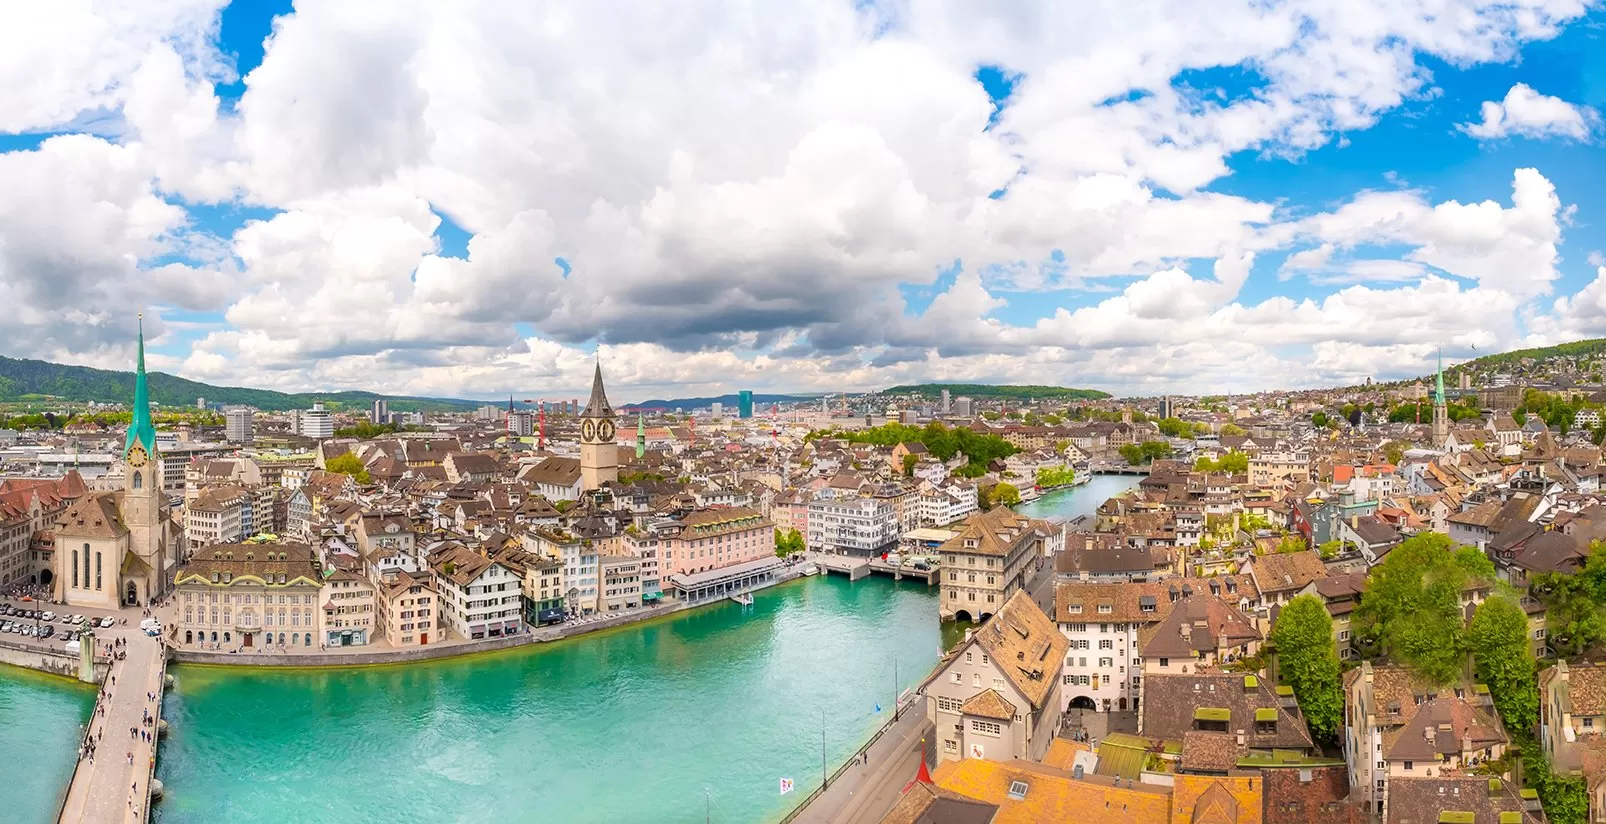 Zurich itinerary - Things to do in Zurich - View from Grossmunter